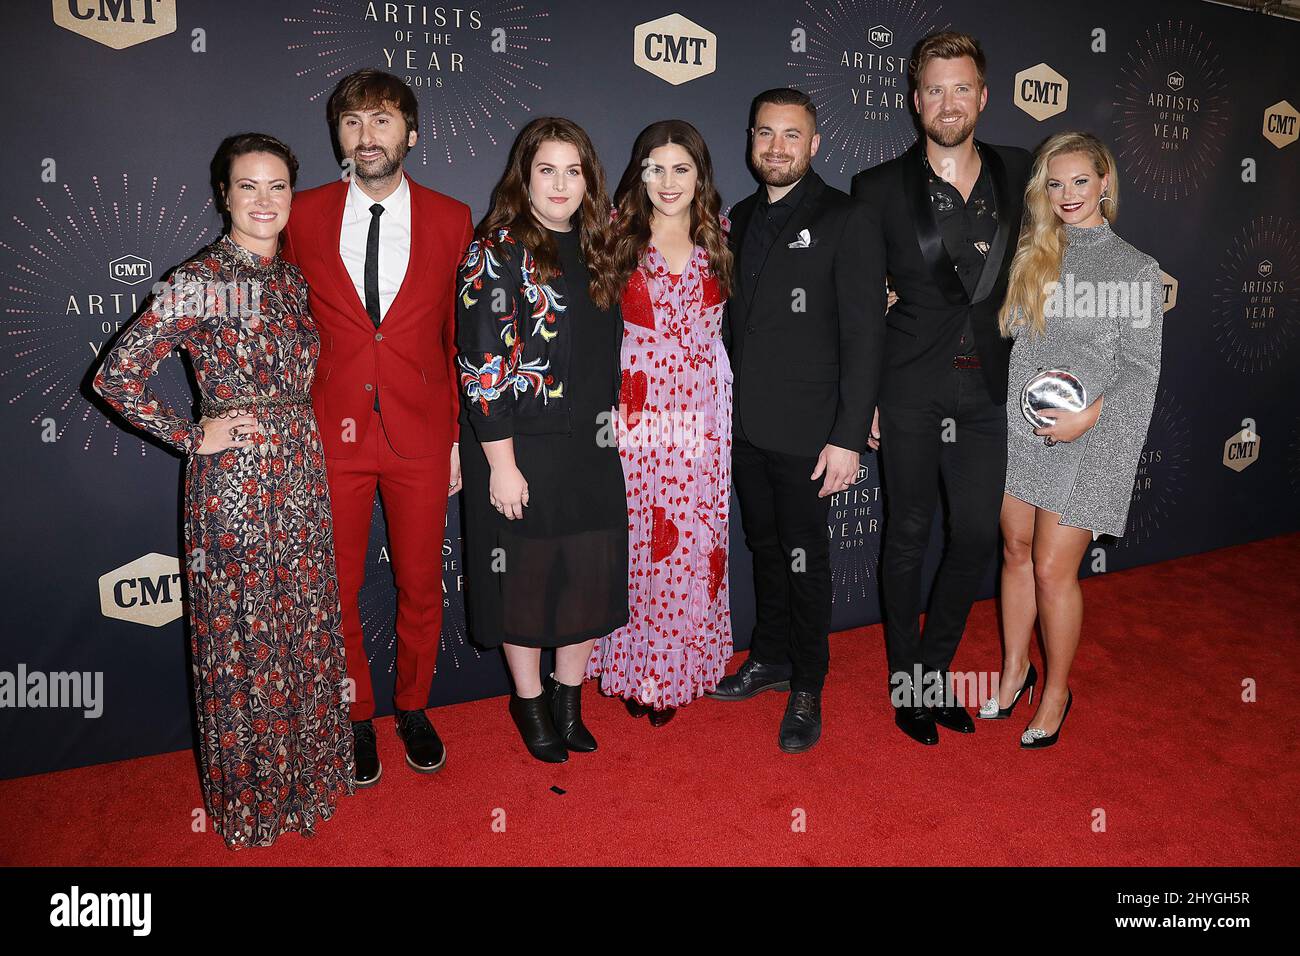 Dave Haywood and Hillary Scott and Charles Kelley of Lady Antebellum and spouses Chris Tyrell and Cassie McConnell and Kelli Cashiola attending the CMT Artists of the Year 2018 in Nashville, Tennessee, USA Stock Photo